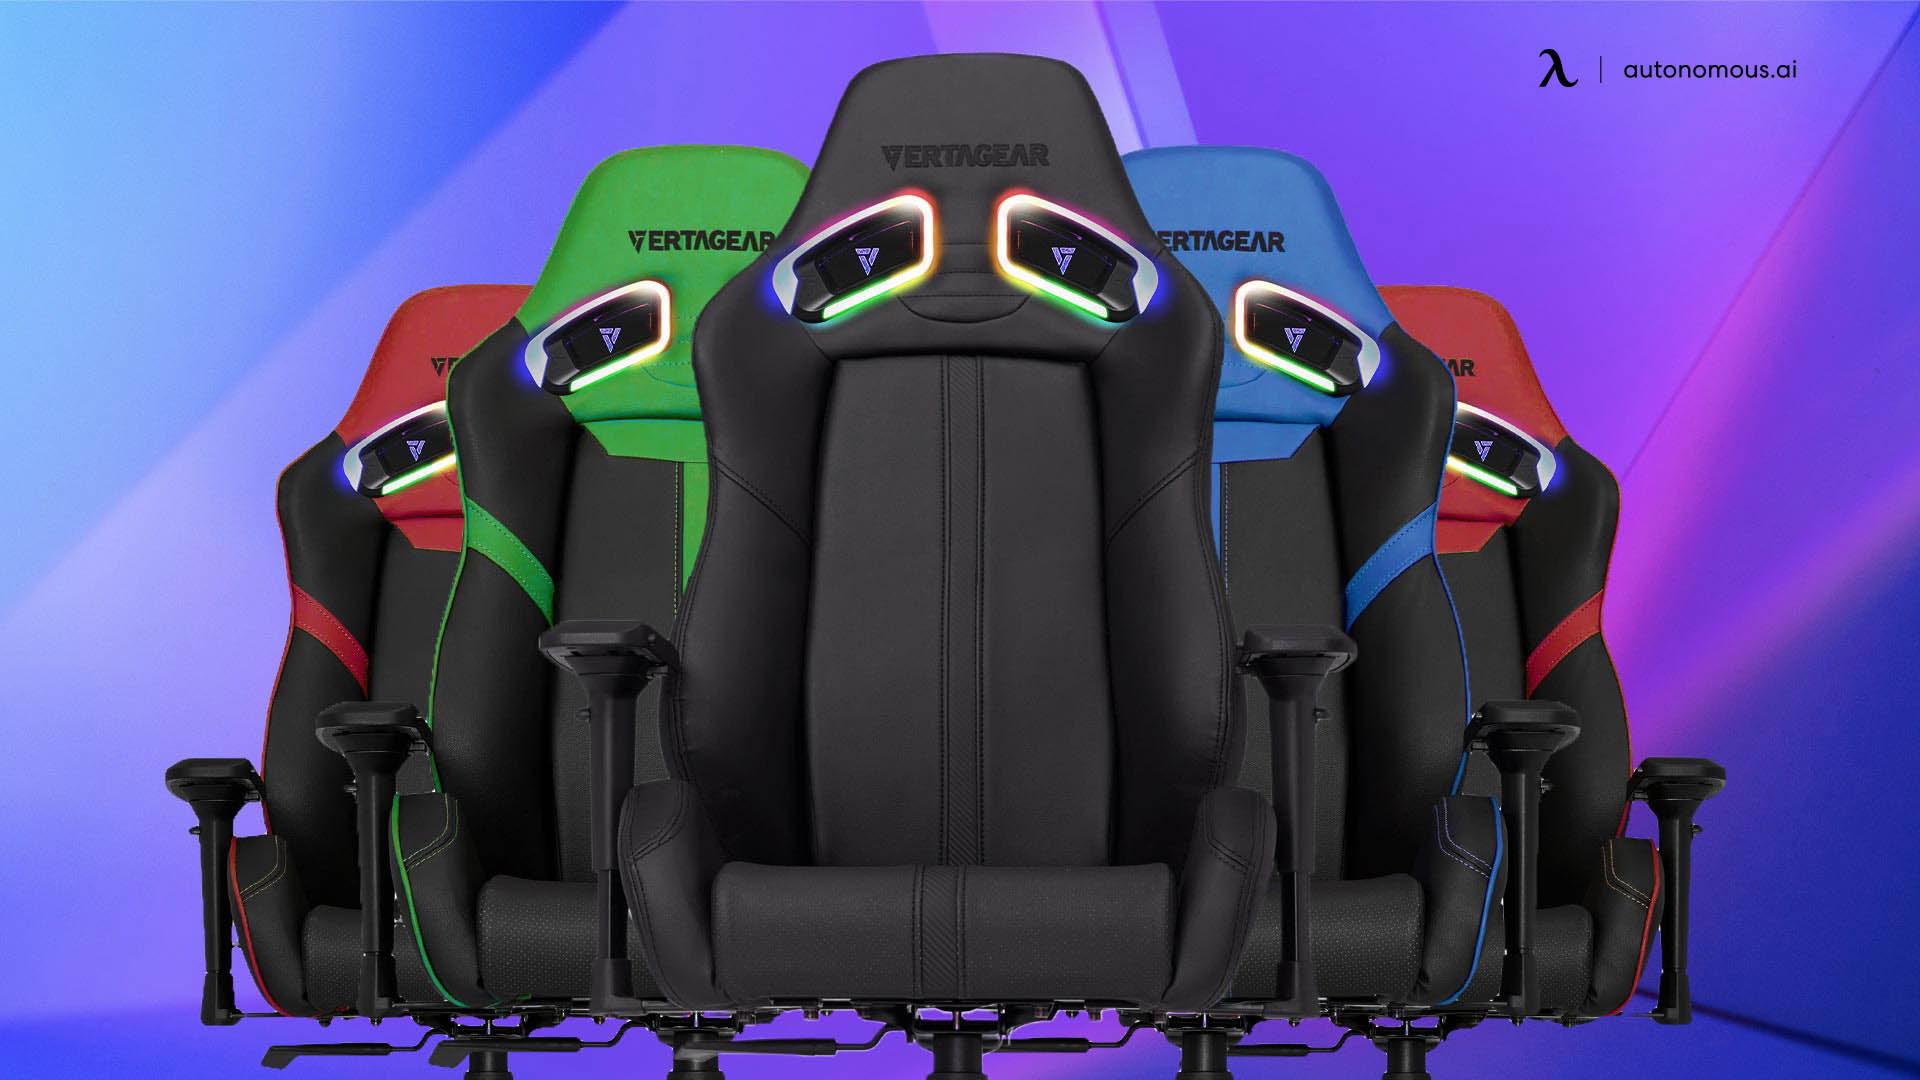 fully adjustable gaming chair SL5000 by Vertagear